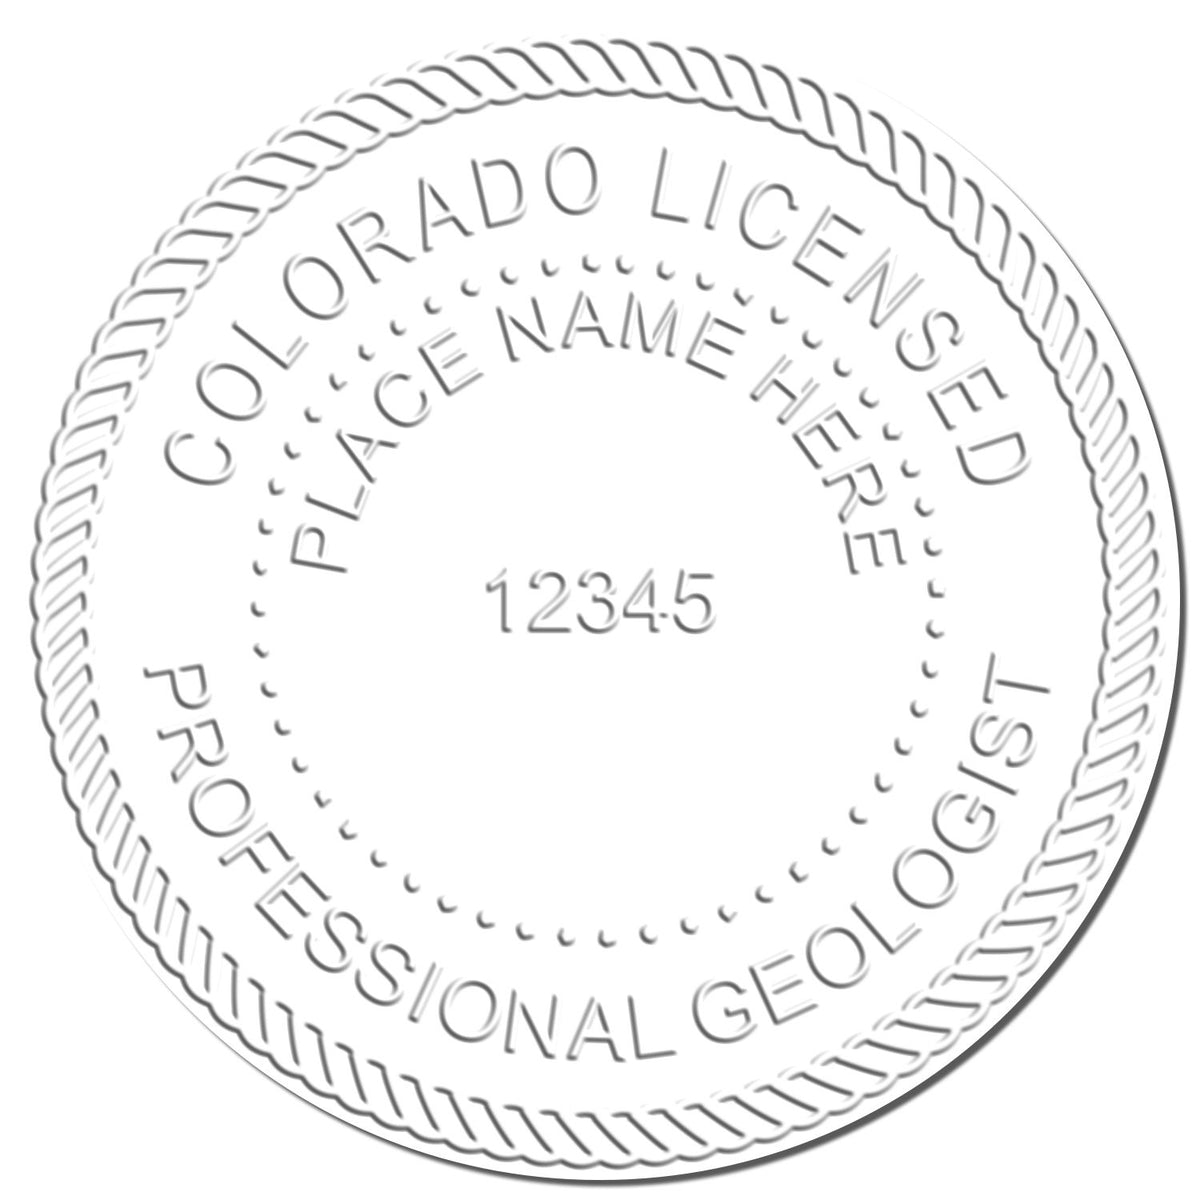 This paper is stamped with a sample imprint of the Handheld Colorado Professional Geologist Embosser, signifying its quality and reliability.